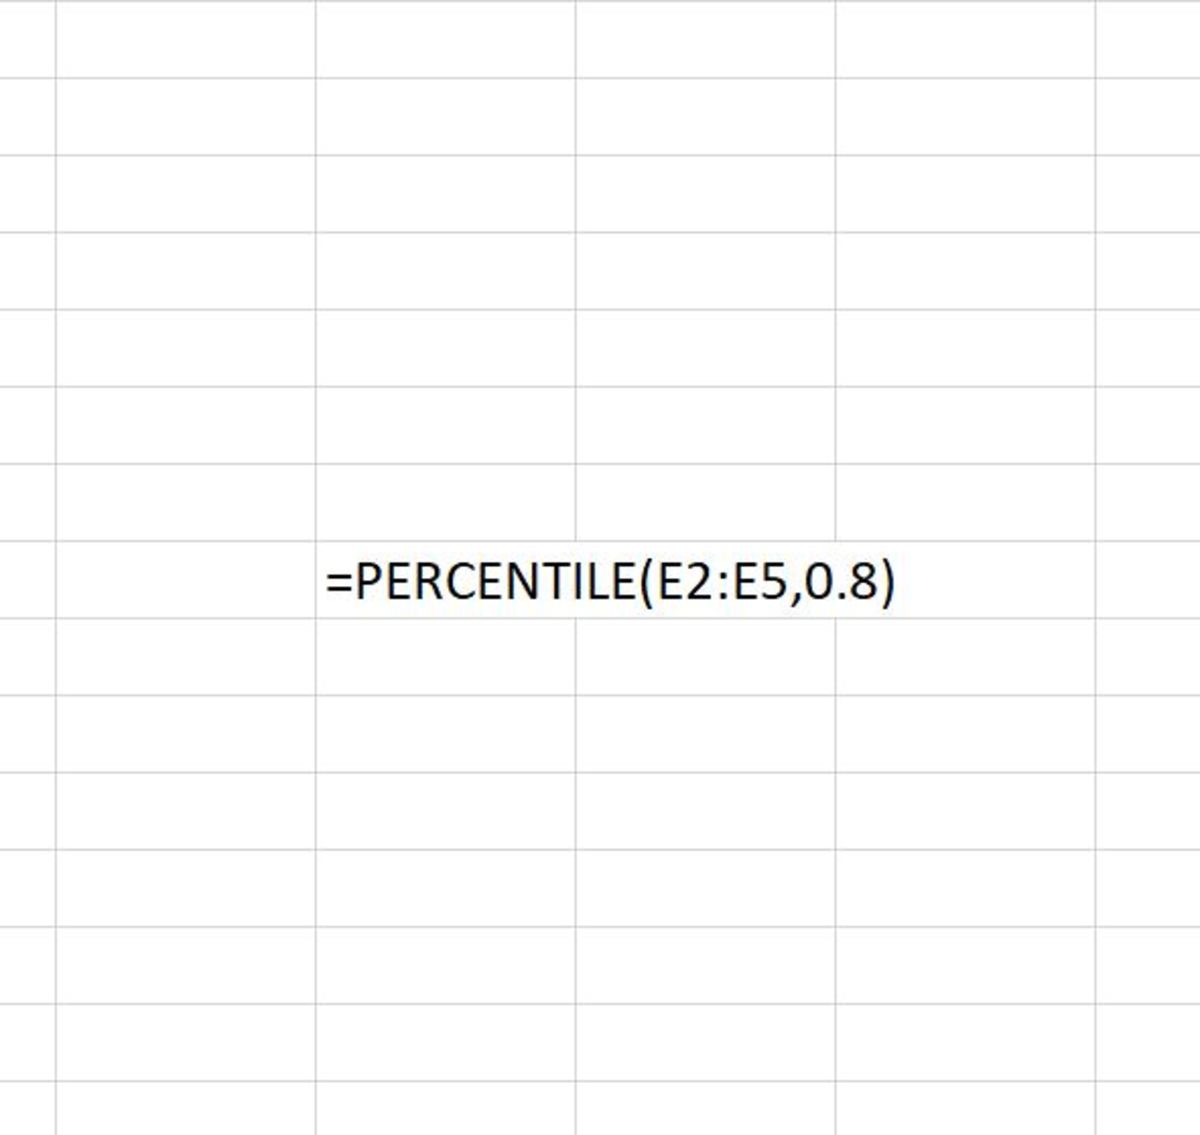 This illustration shows the PERCENTILE function being used in Excel to find the 80th percentile of the cell range E2:E5. By default, the 80th percentile would be inclusive in the results. 